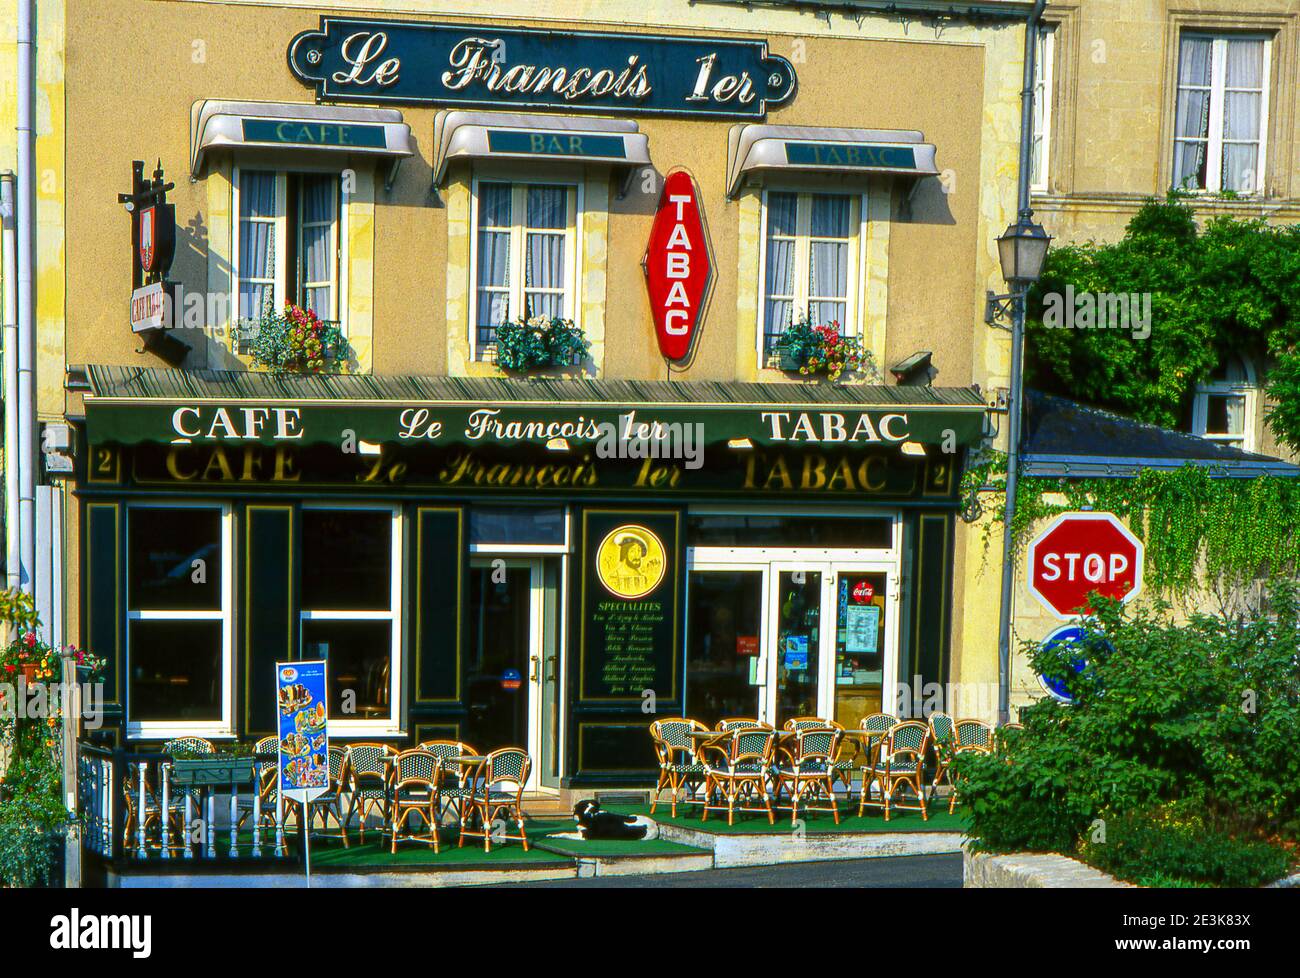 Le Francois 1er Cafe in the town of Azay-le-Rideau in the Loire Valley  region of France Stock Photo - Alamy